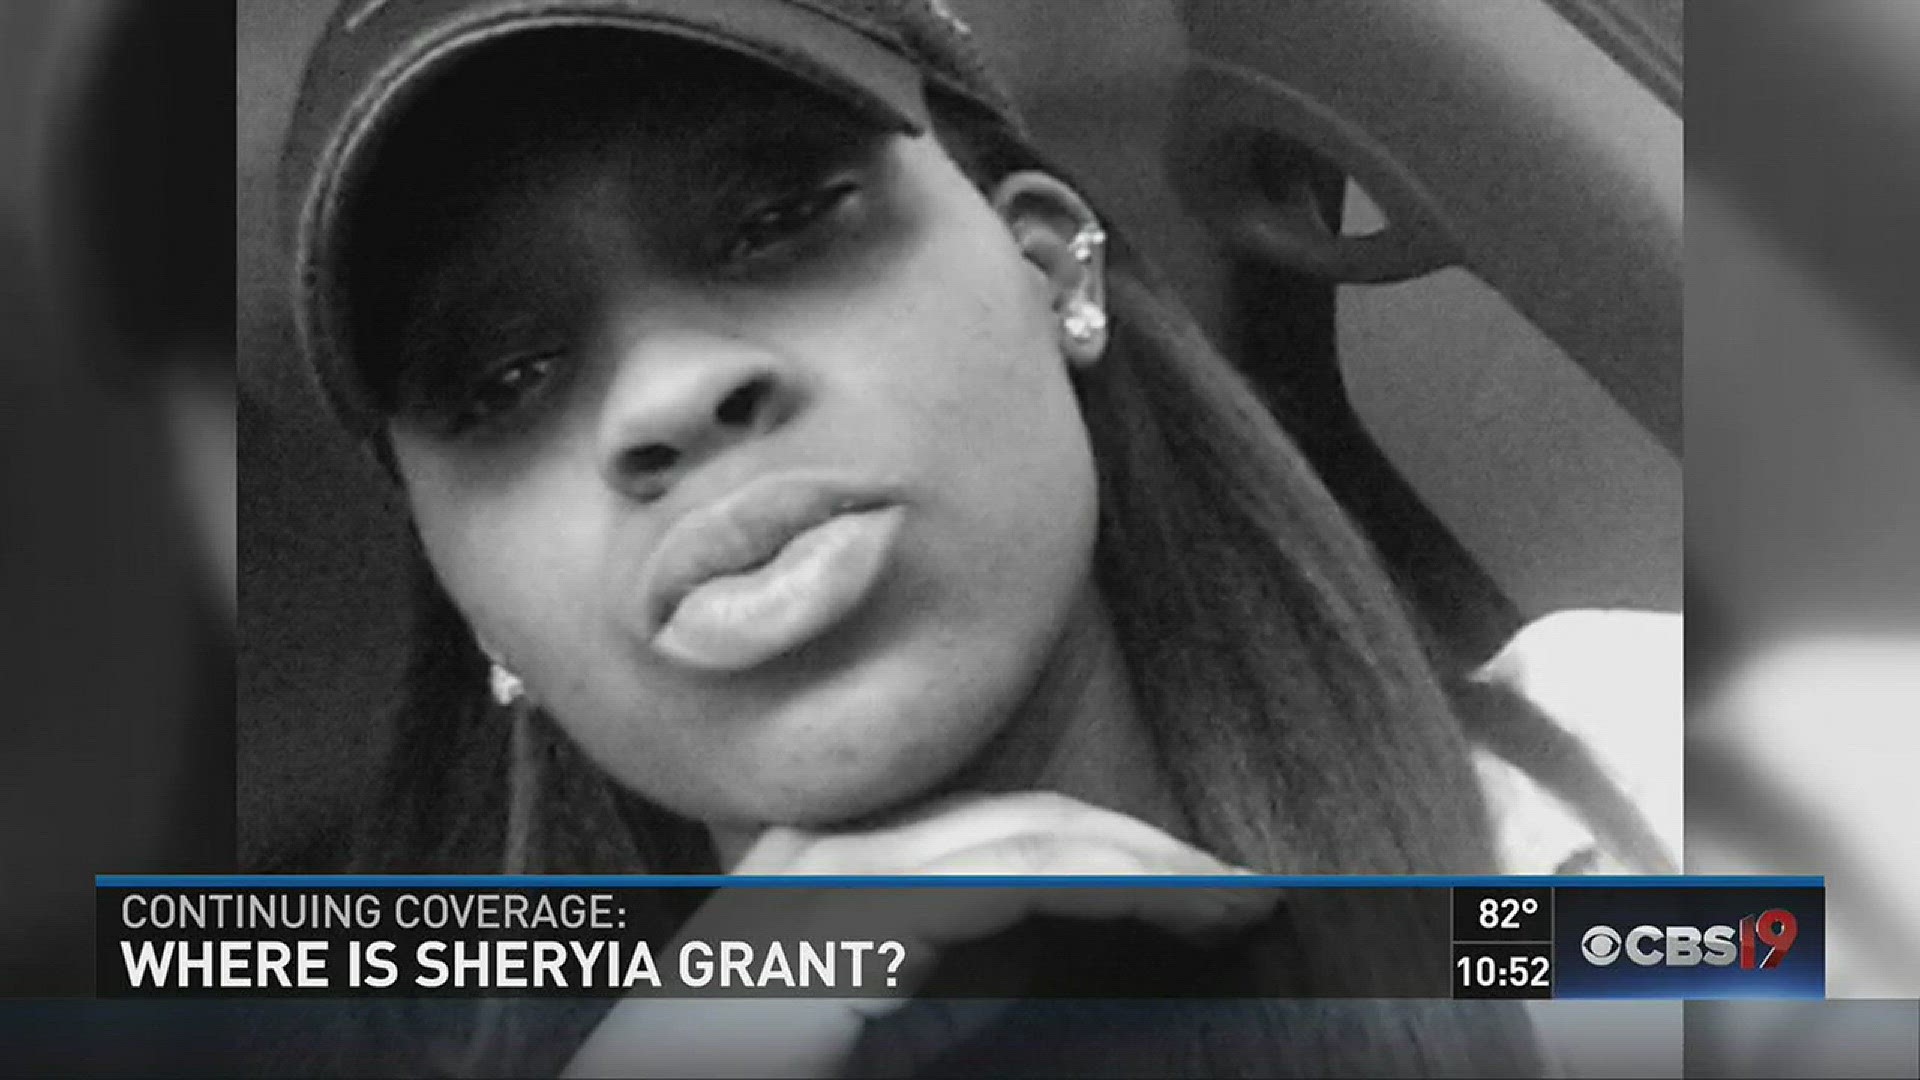 Continuing Coverage: Sheryia Grant still missing.